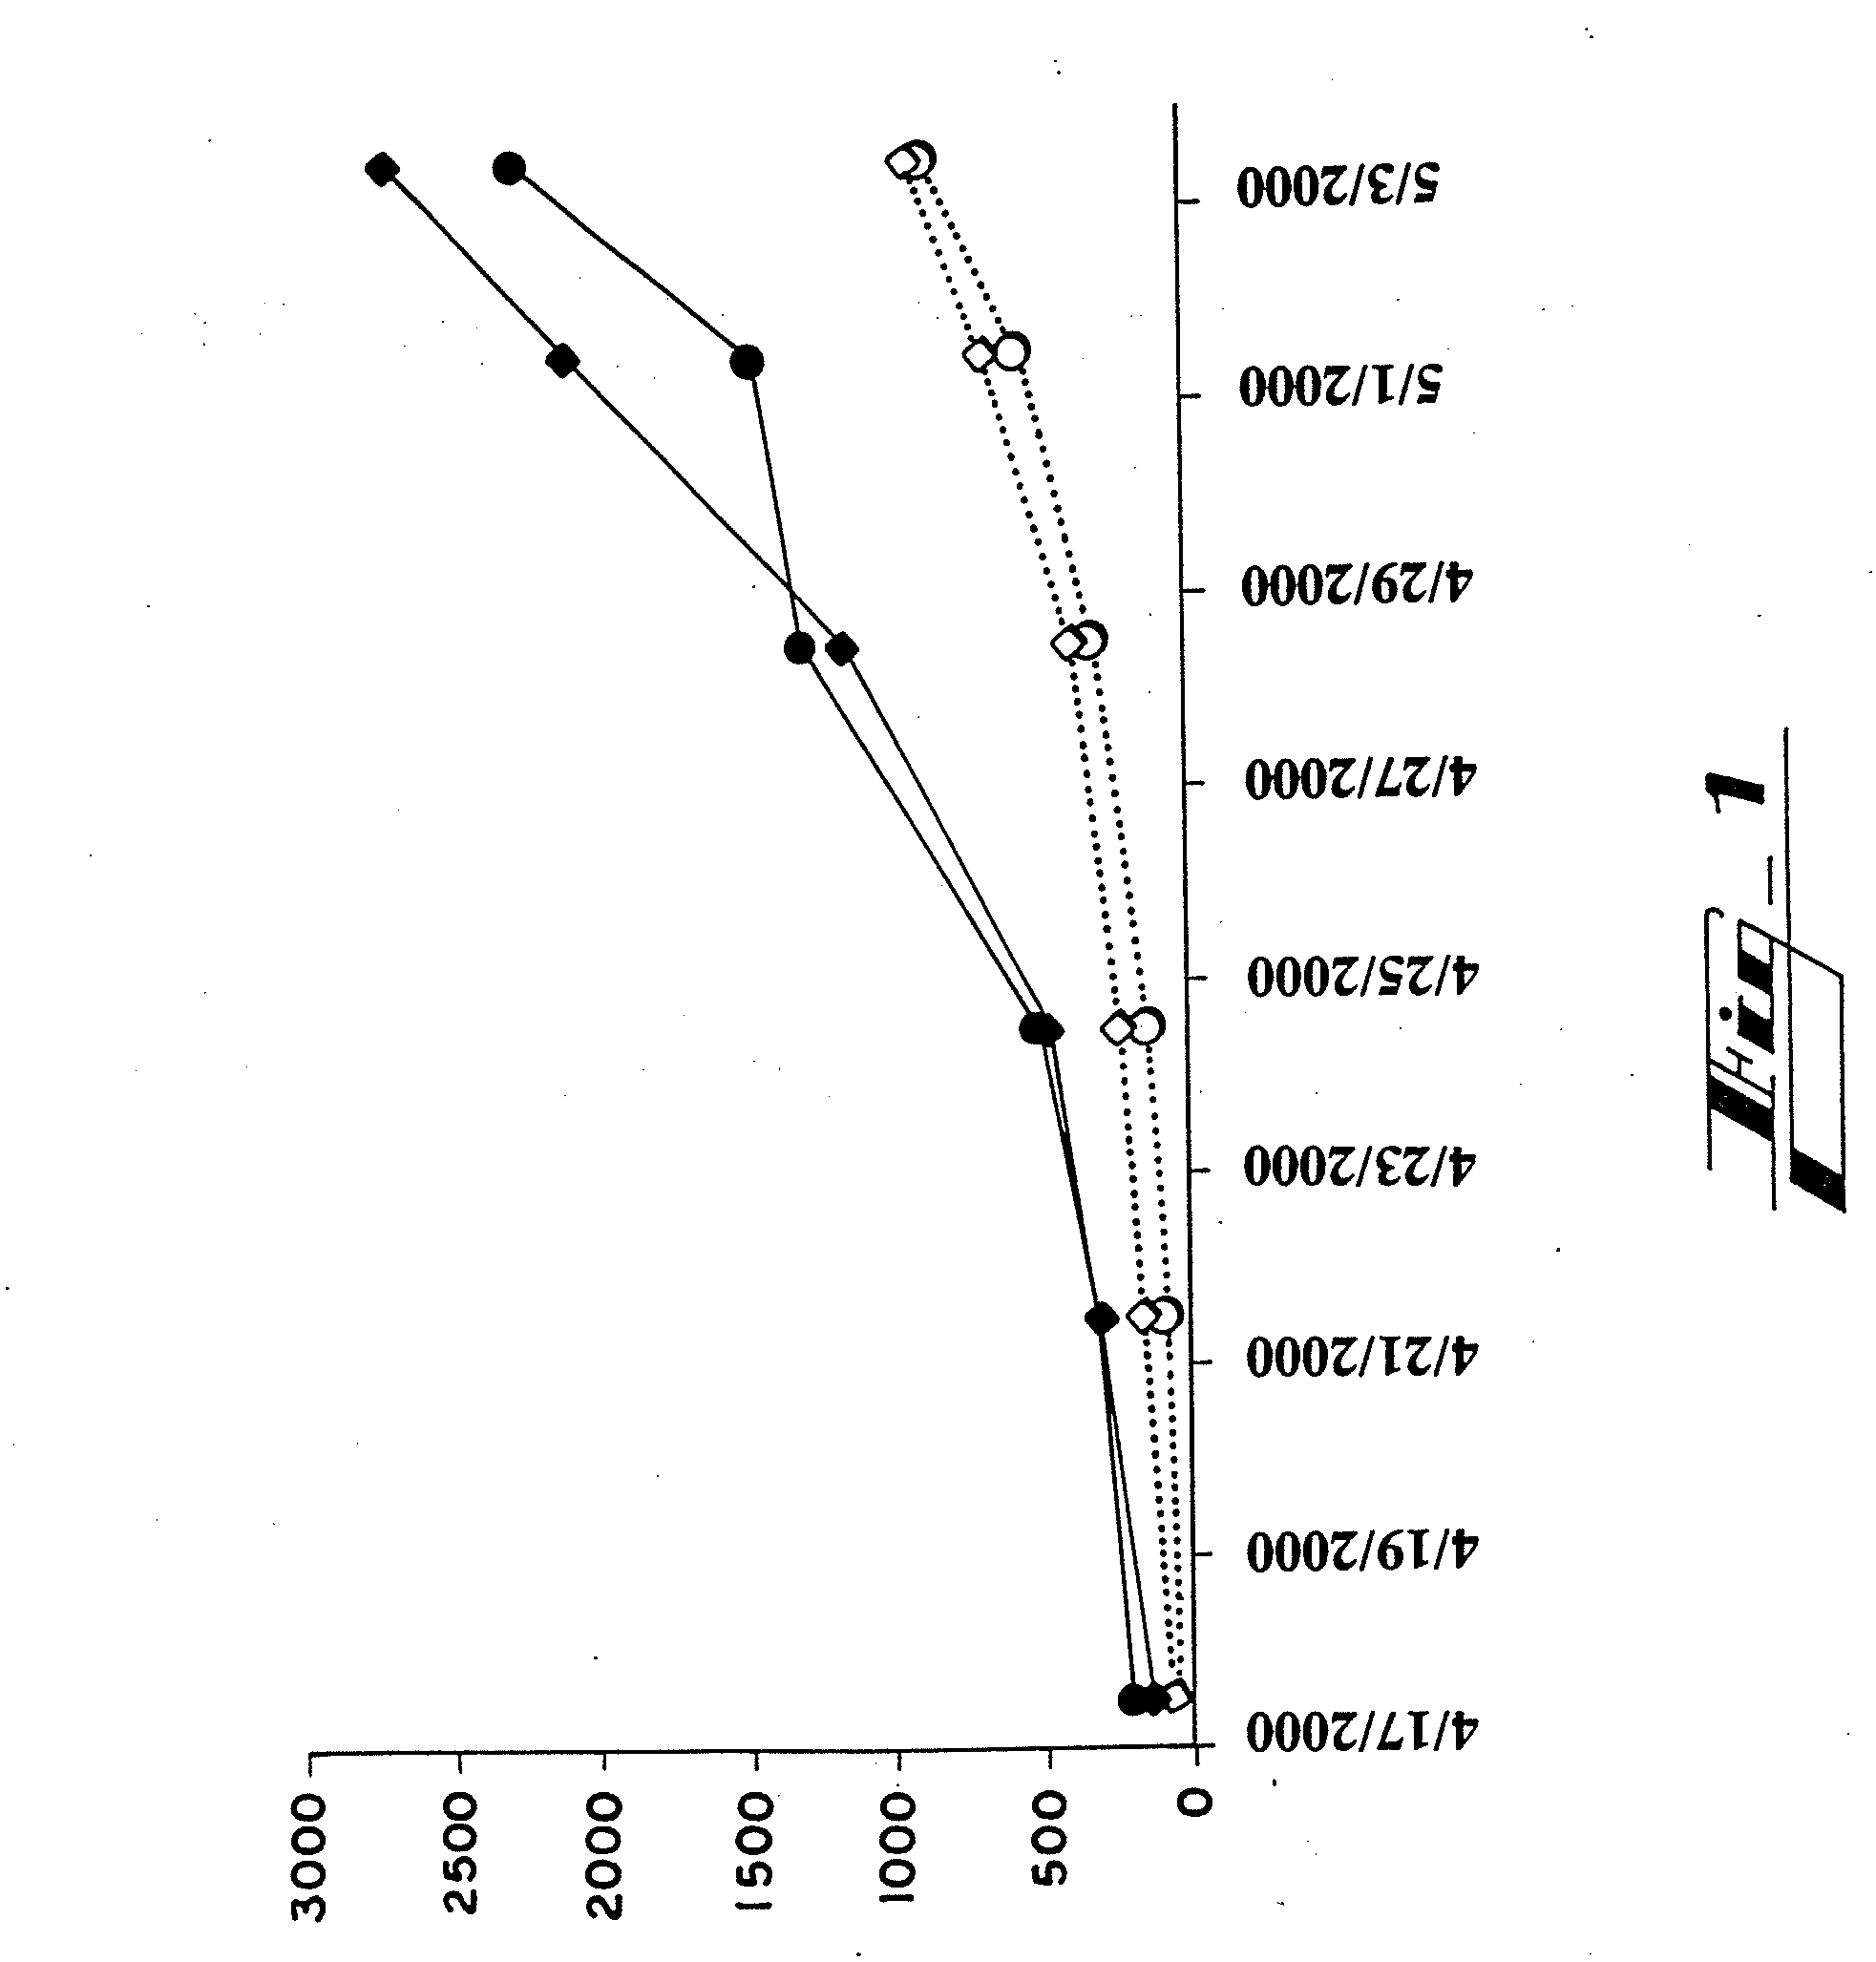 GBS Toxin Receptor Compositions and Methods of Use